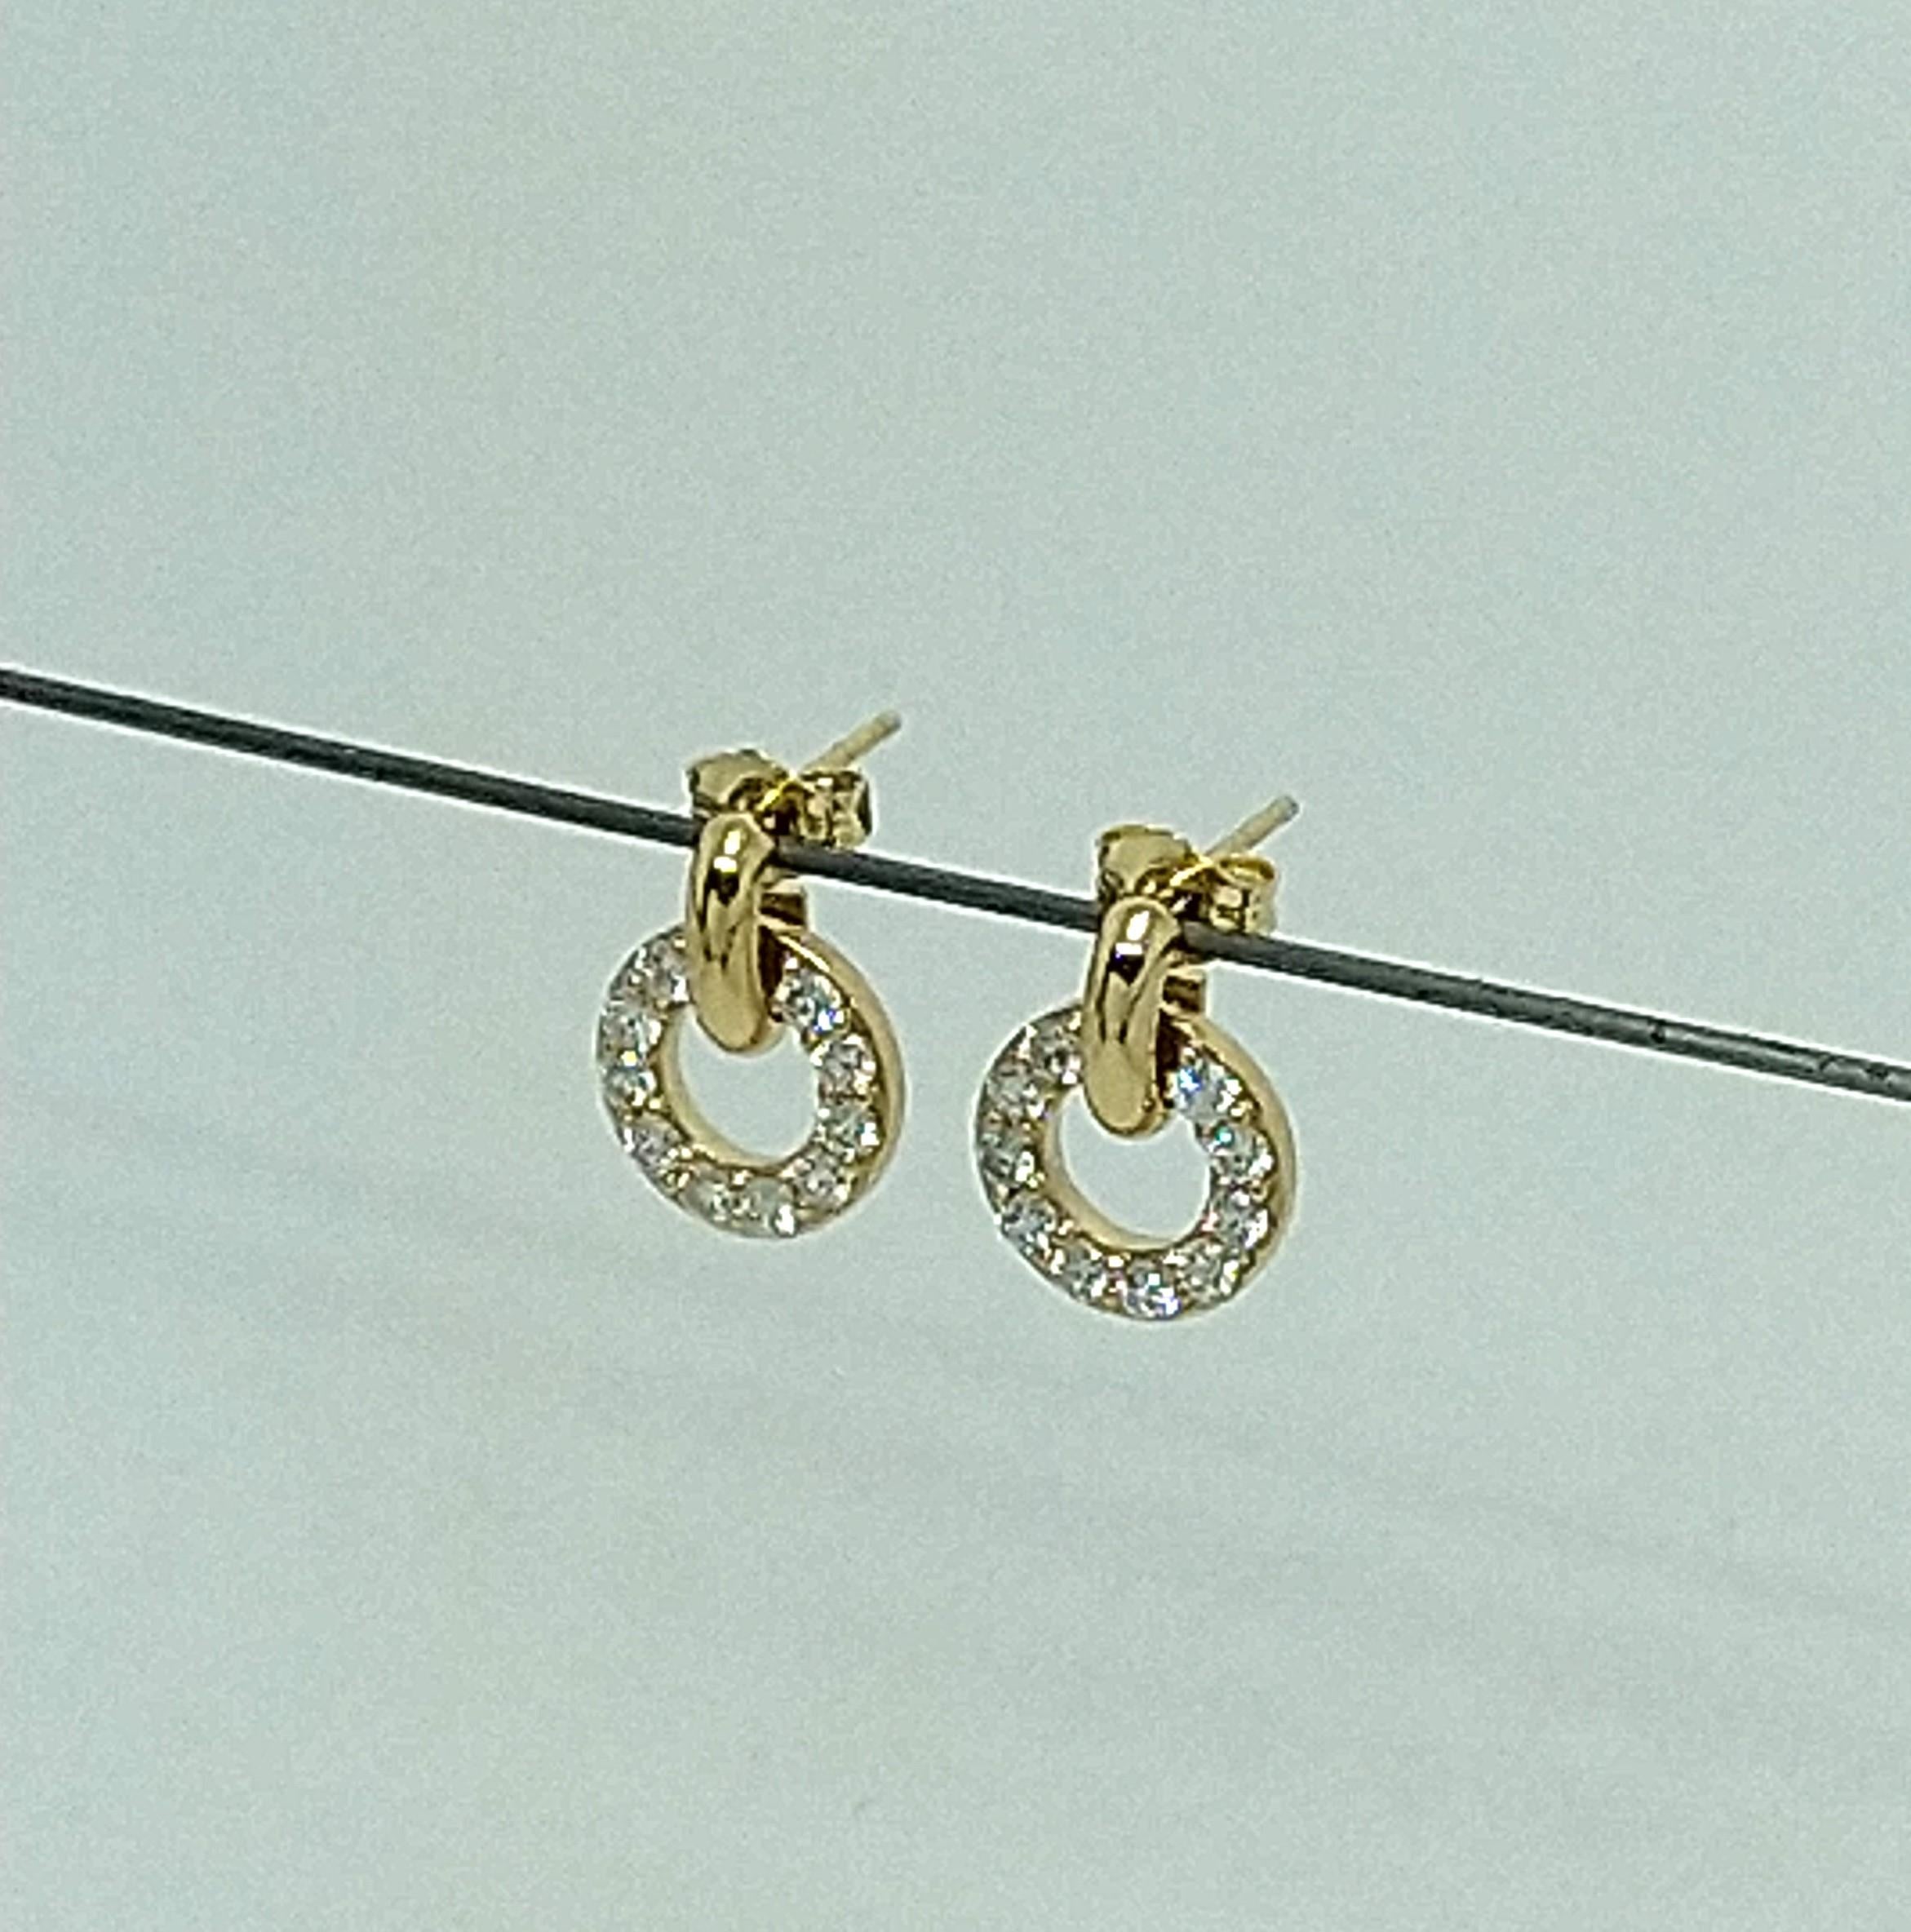 18 Karat Yellow GIA  Diamond  Hoop Dangle Earrings, Tiffany Designer , Thomas Kurilla is keeping it simple and elegant. The hoop earring is  14mm x 10.5 mm diameter. Tiny but mighty. All day elegance, day into evening no problem.  These GIA diamonds